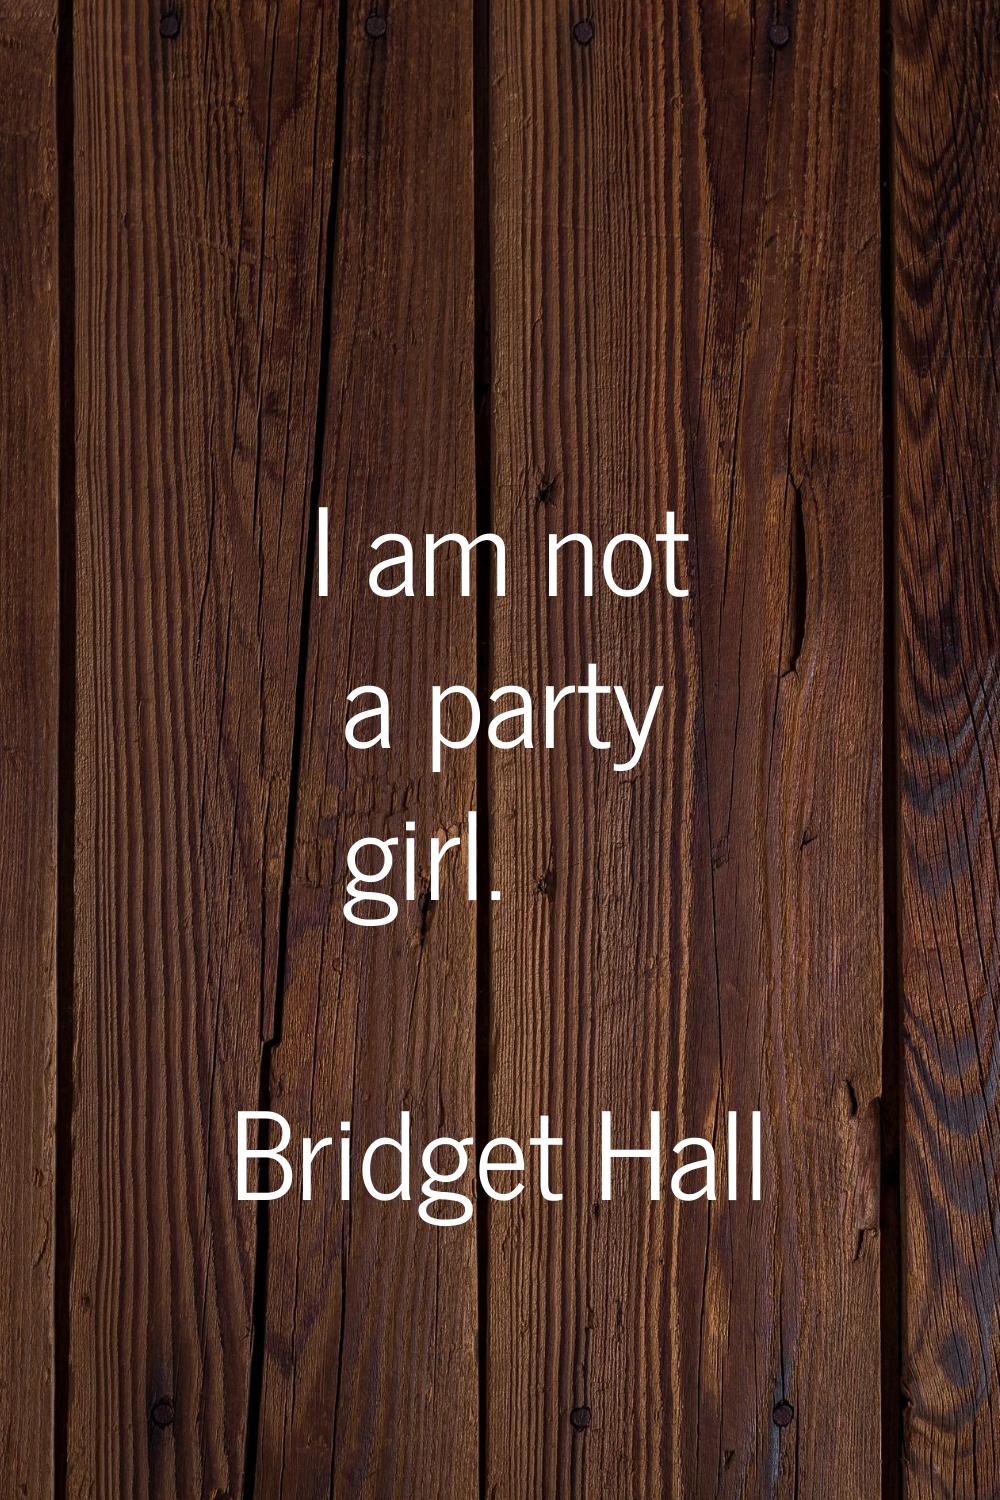 I am not a party girl.